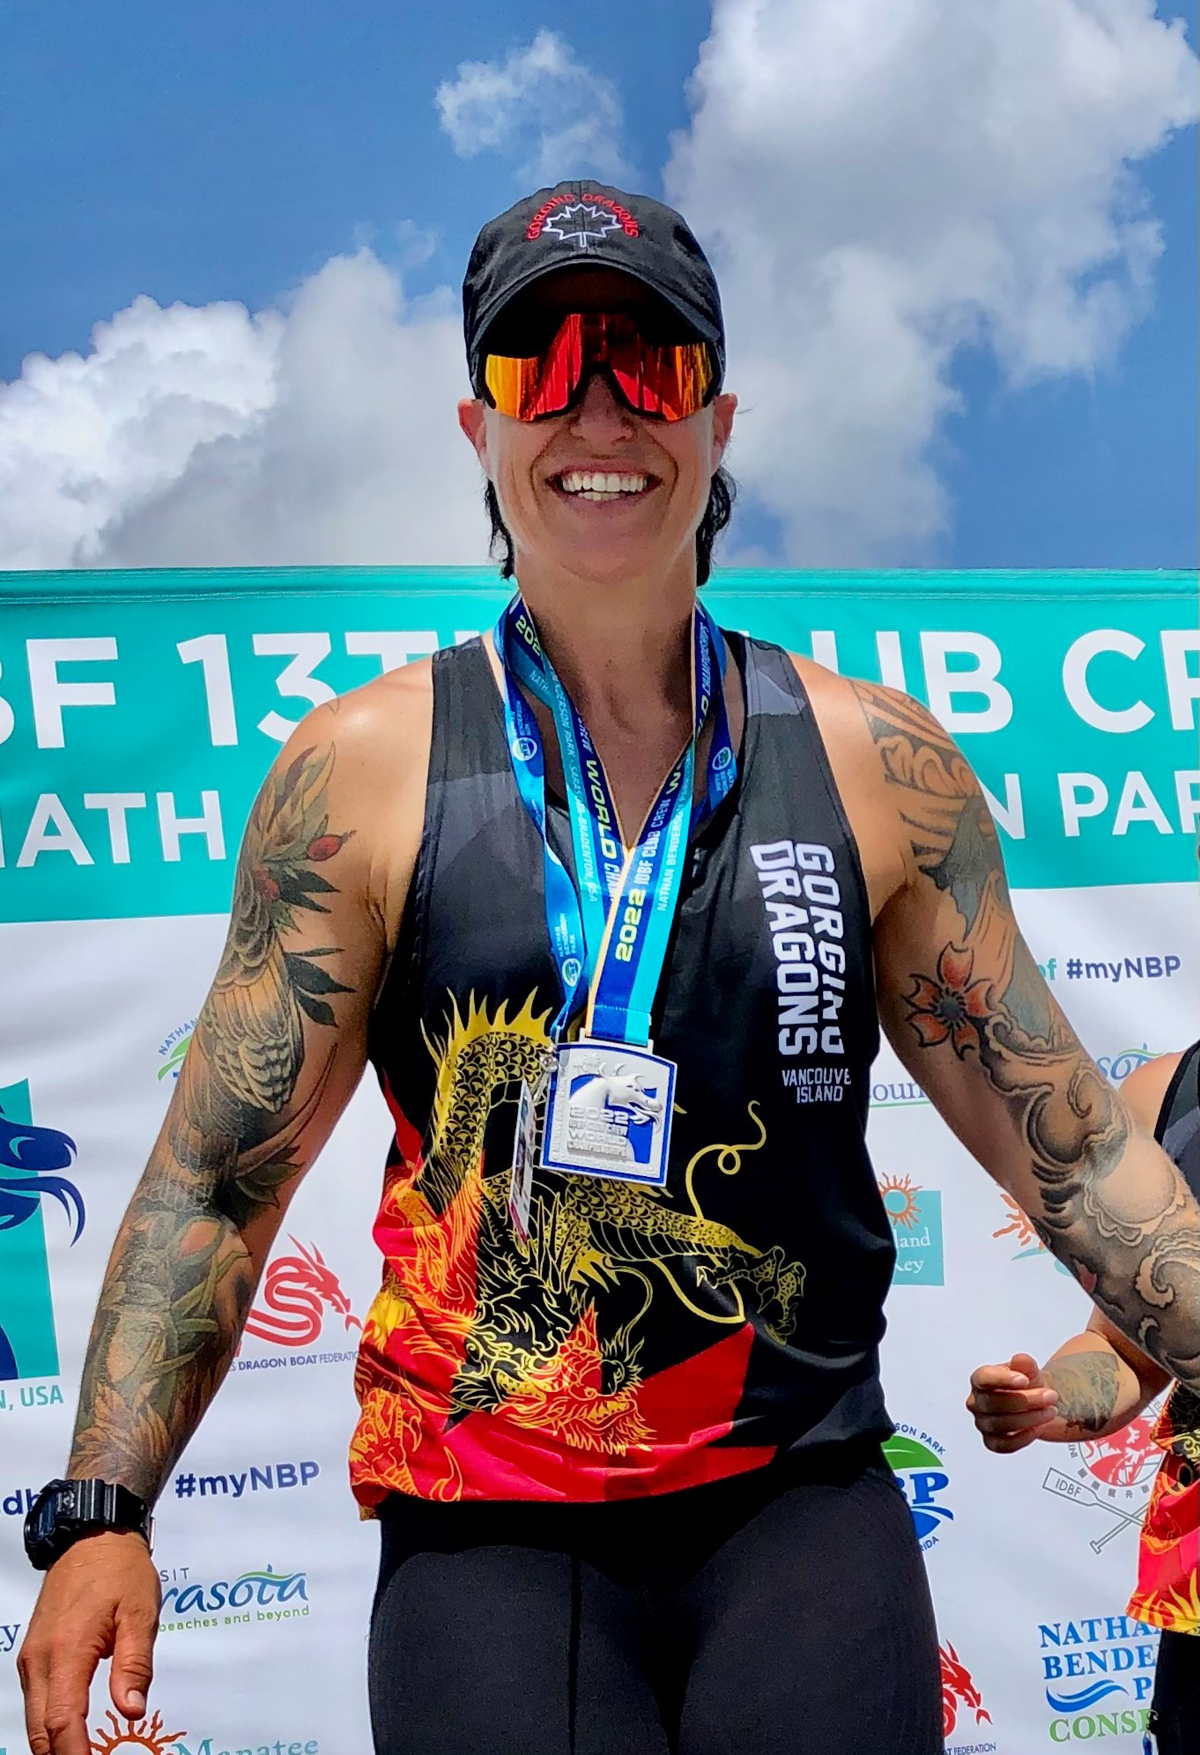 Allison Verley is all smiles with her silver medal at the 2022 Club Crew World Dragon Boat Championships in Sarasota, Florida this past August where Allison Verley medalled in the premier division, receiving gold in the 2,000m and silver in both the 200m and 500m.